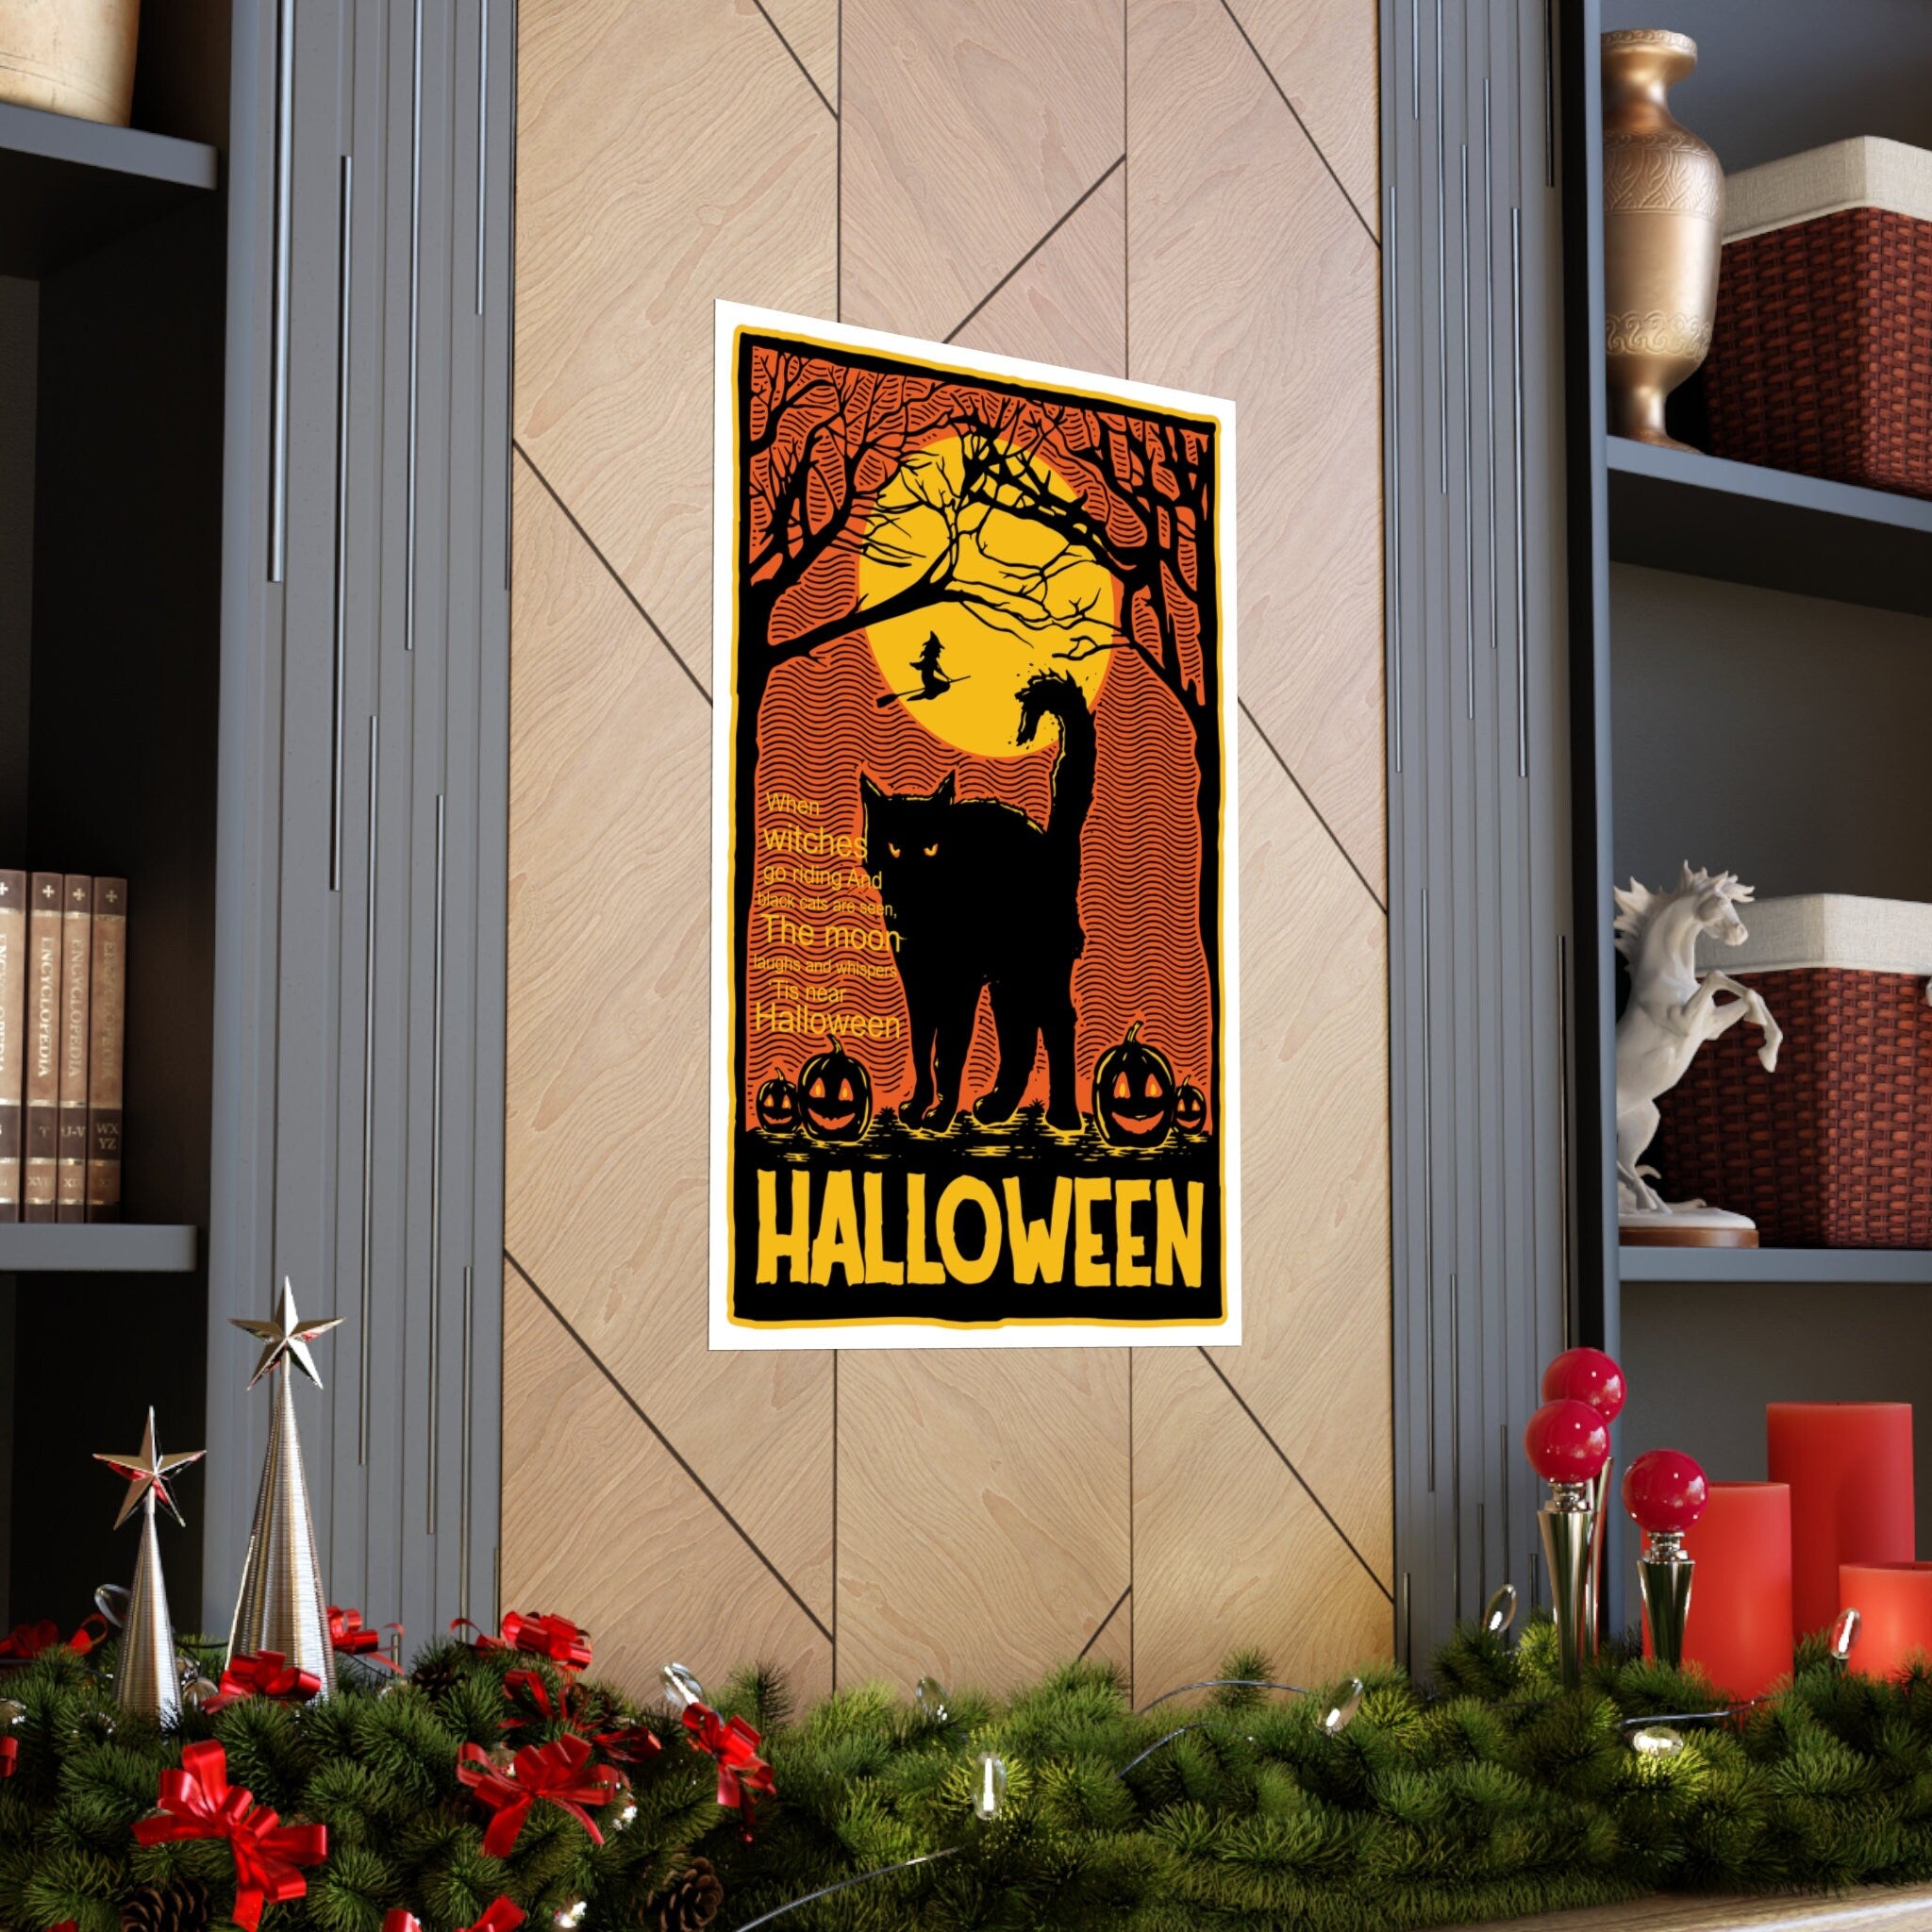 Tis Near Halloween Premium Matte Poster | PRINTED and SHIPPED | Mailed Prints Mailed Wall Art Decor | Halloween Prints Wall Art